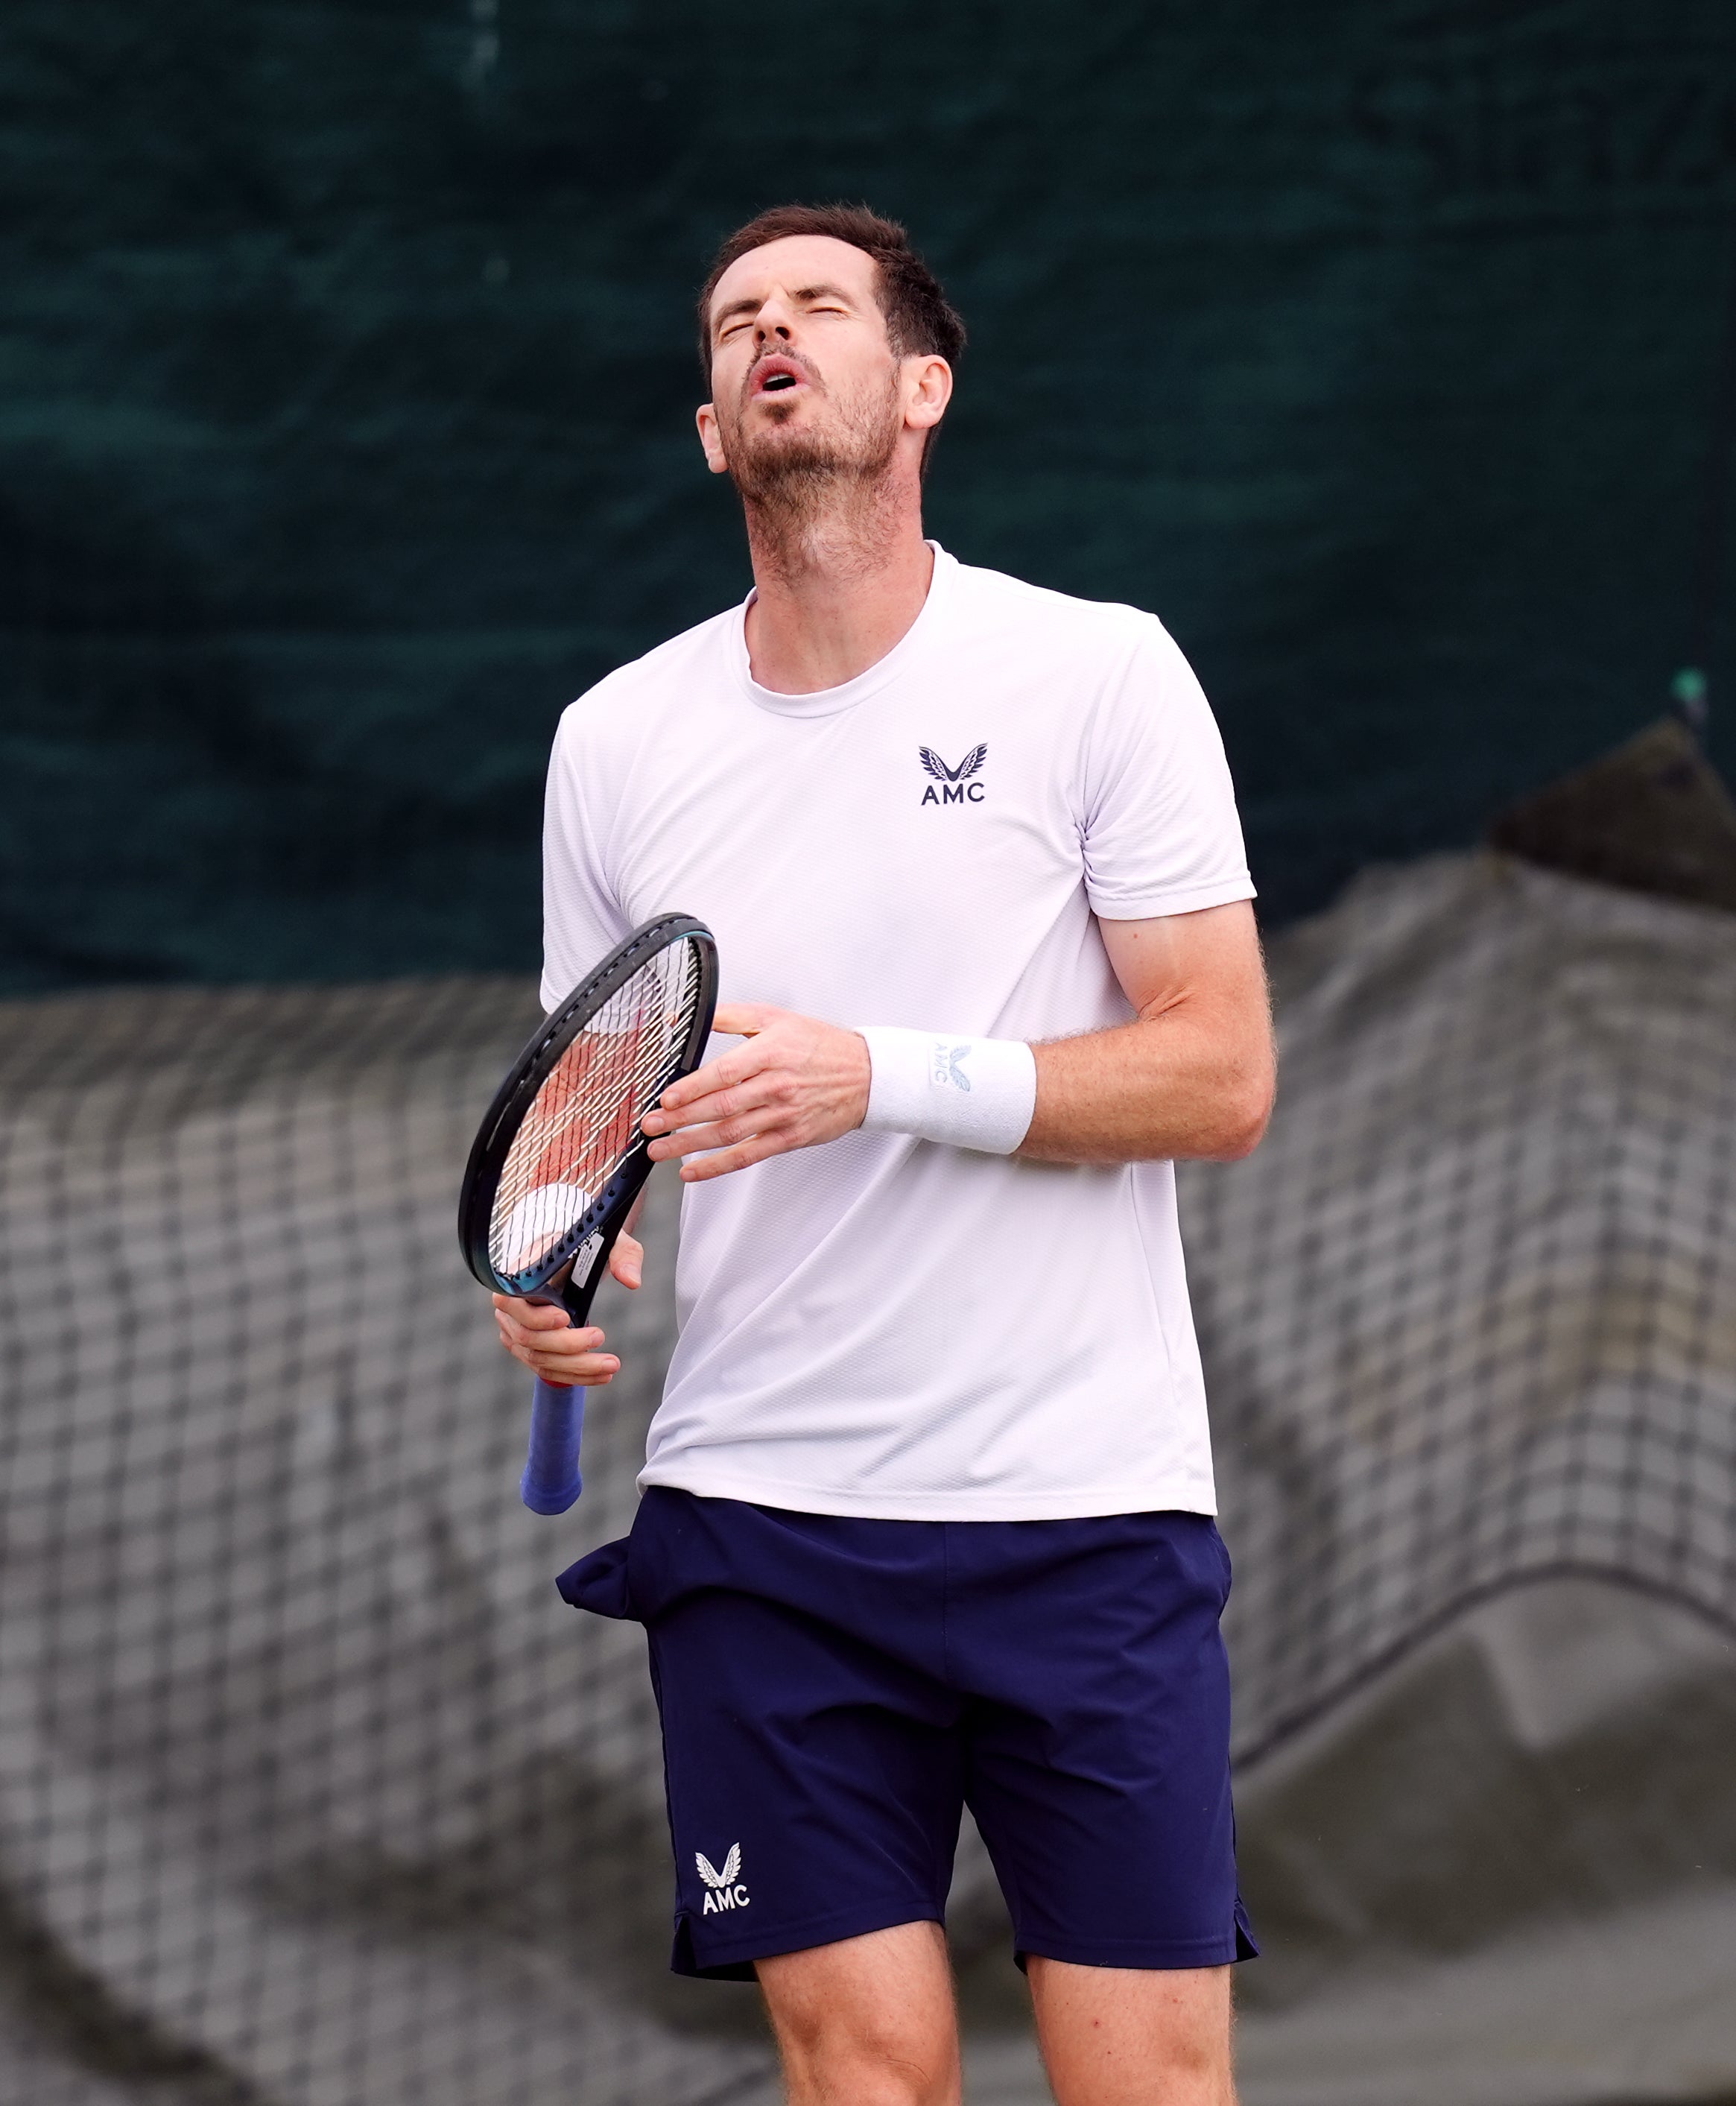 pa ready, andy murray, wimbledon, kyle edmund, british, all england club, centre court, bolton, fred perry, andy murray shows signs of improvement as he prepares to make wimbledon decision